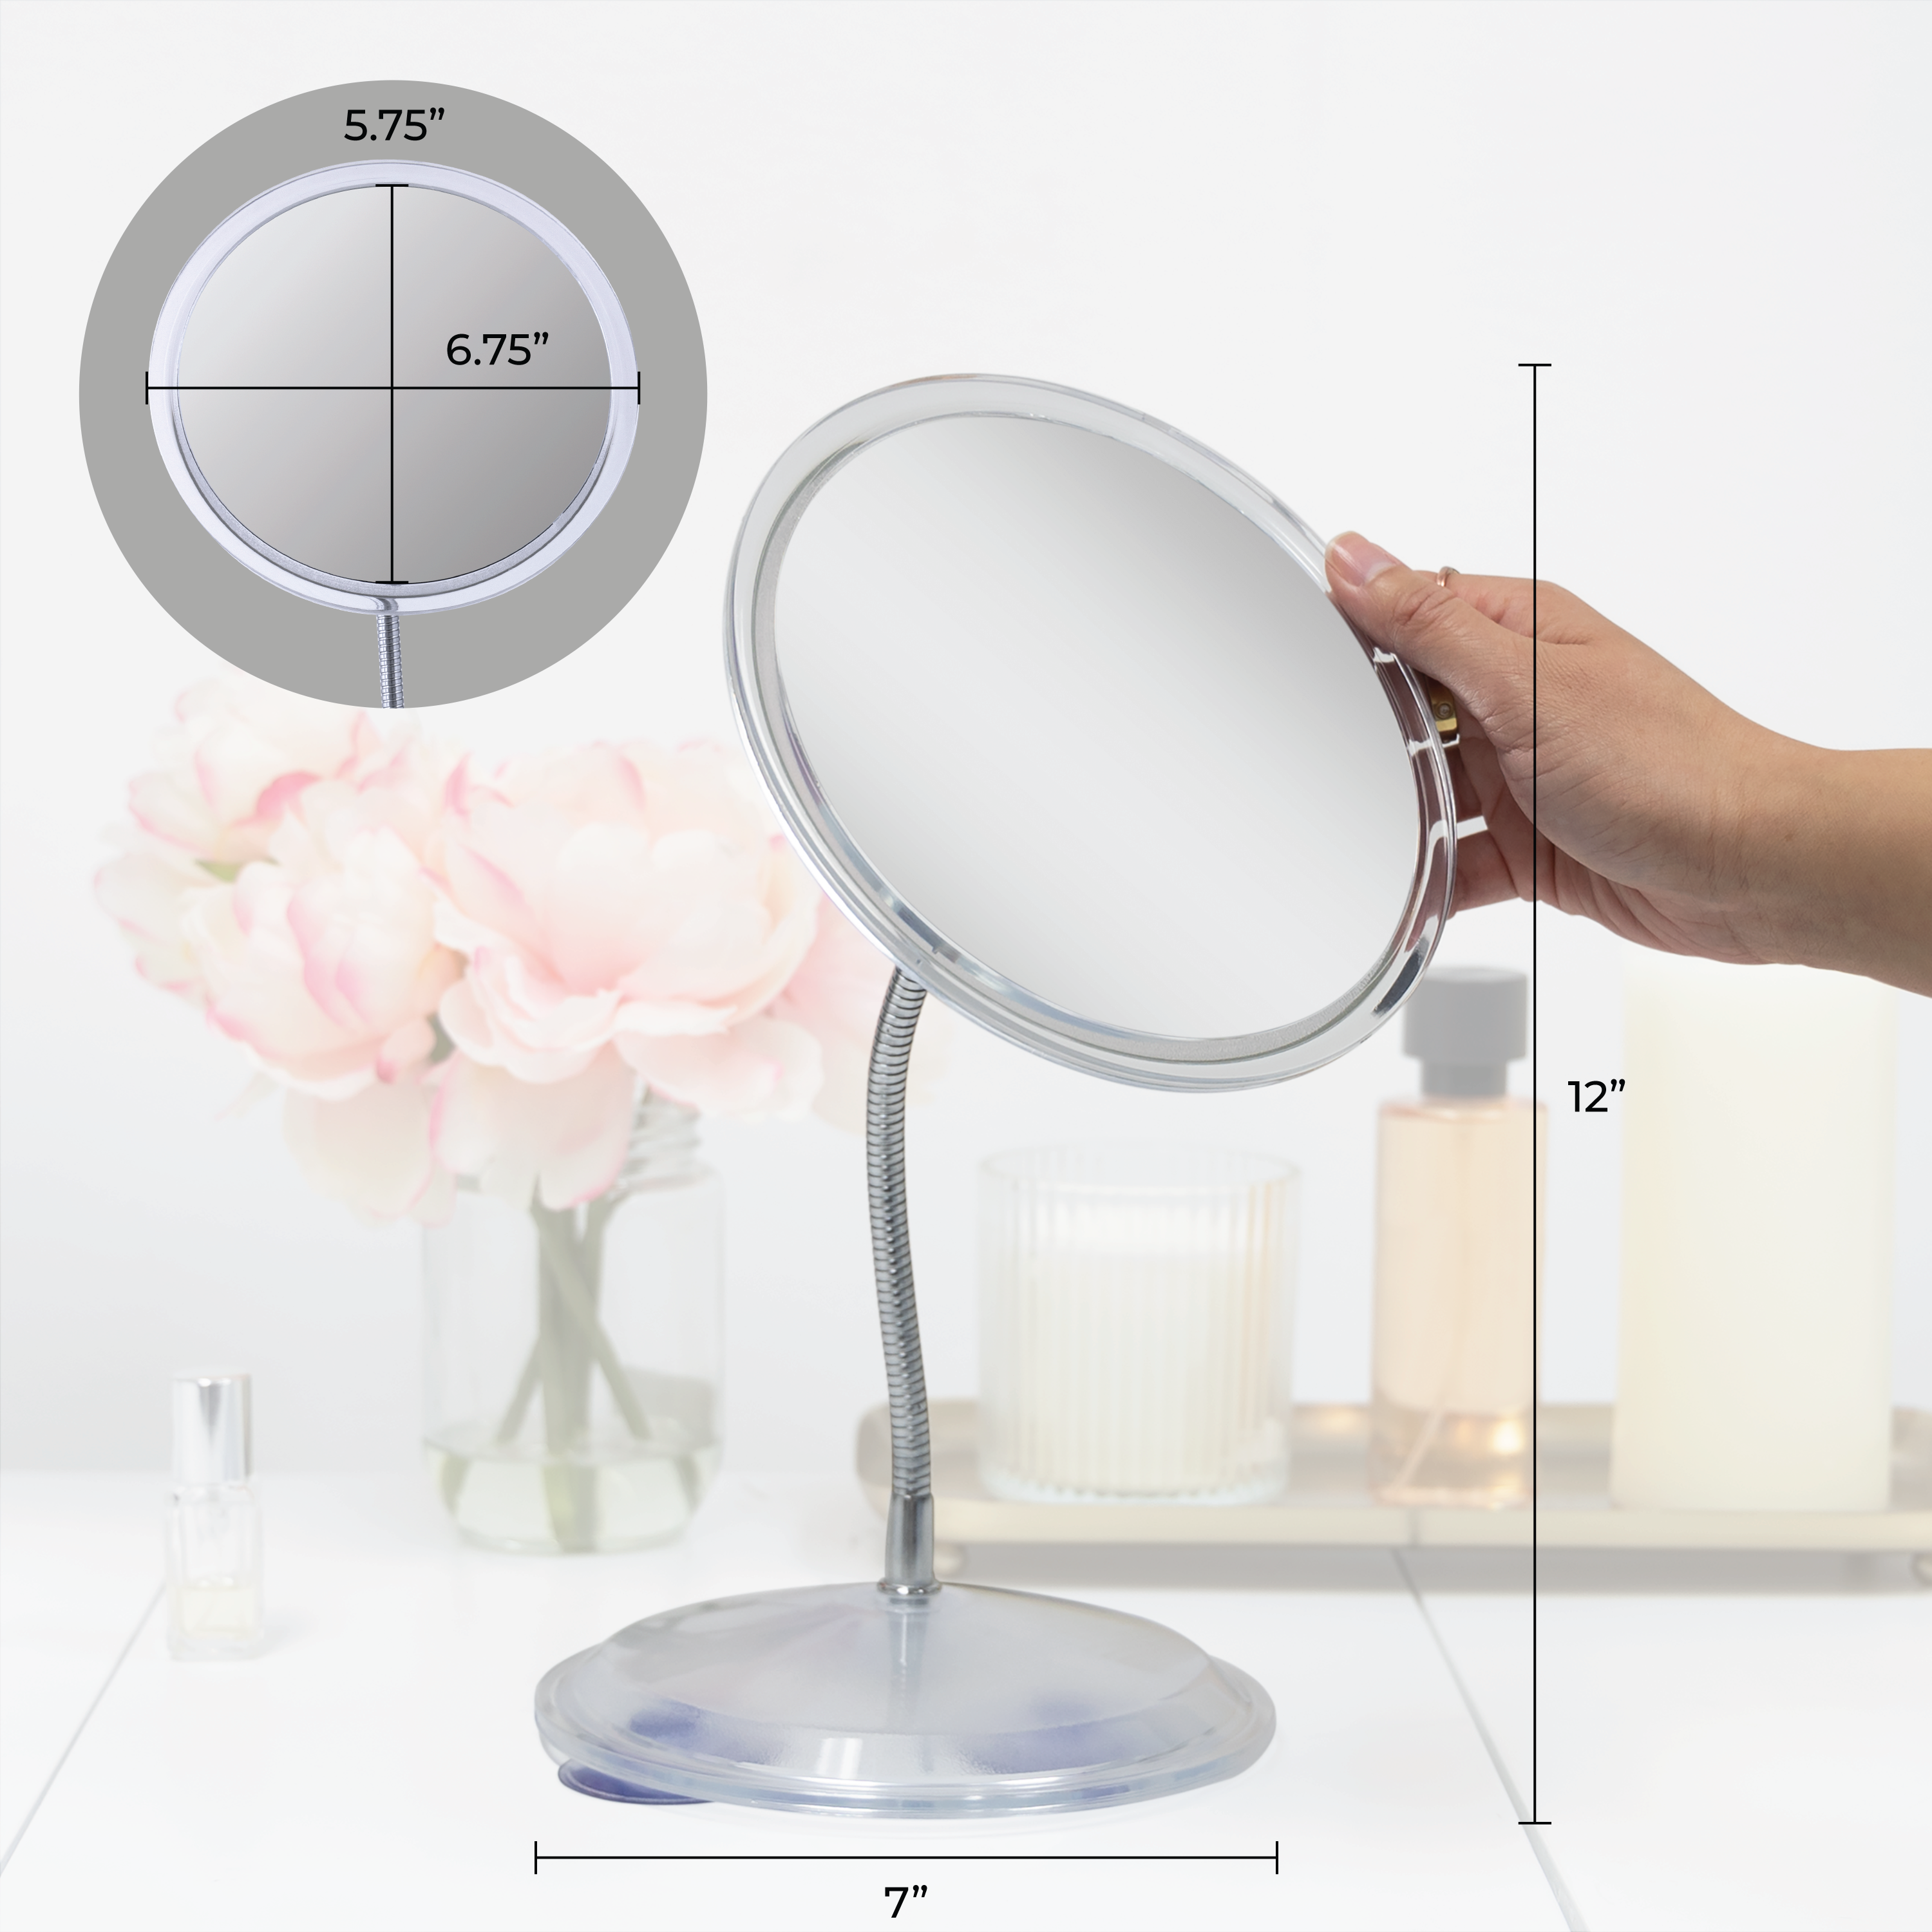 Gooseneck Makeup Mirror with Magnification & Suction Cup